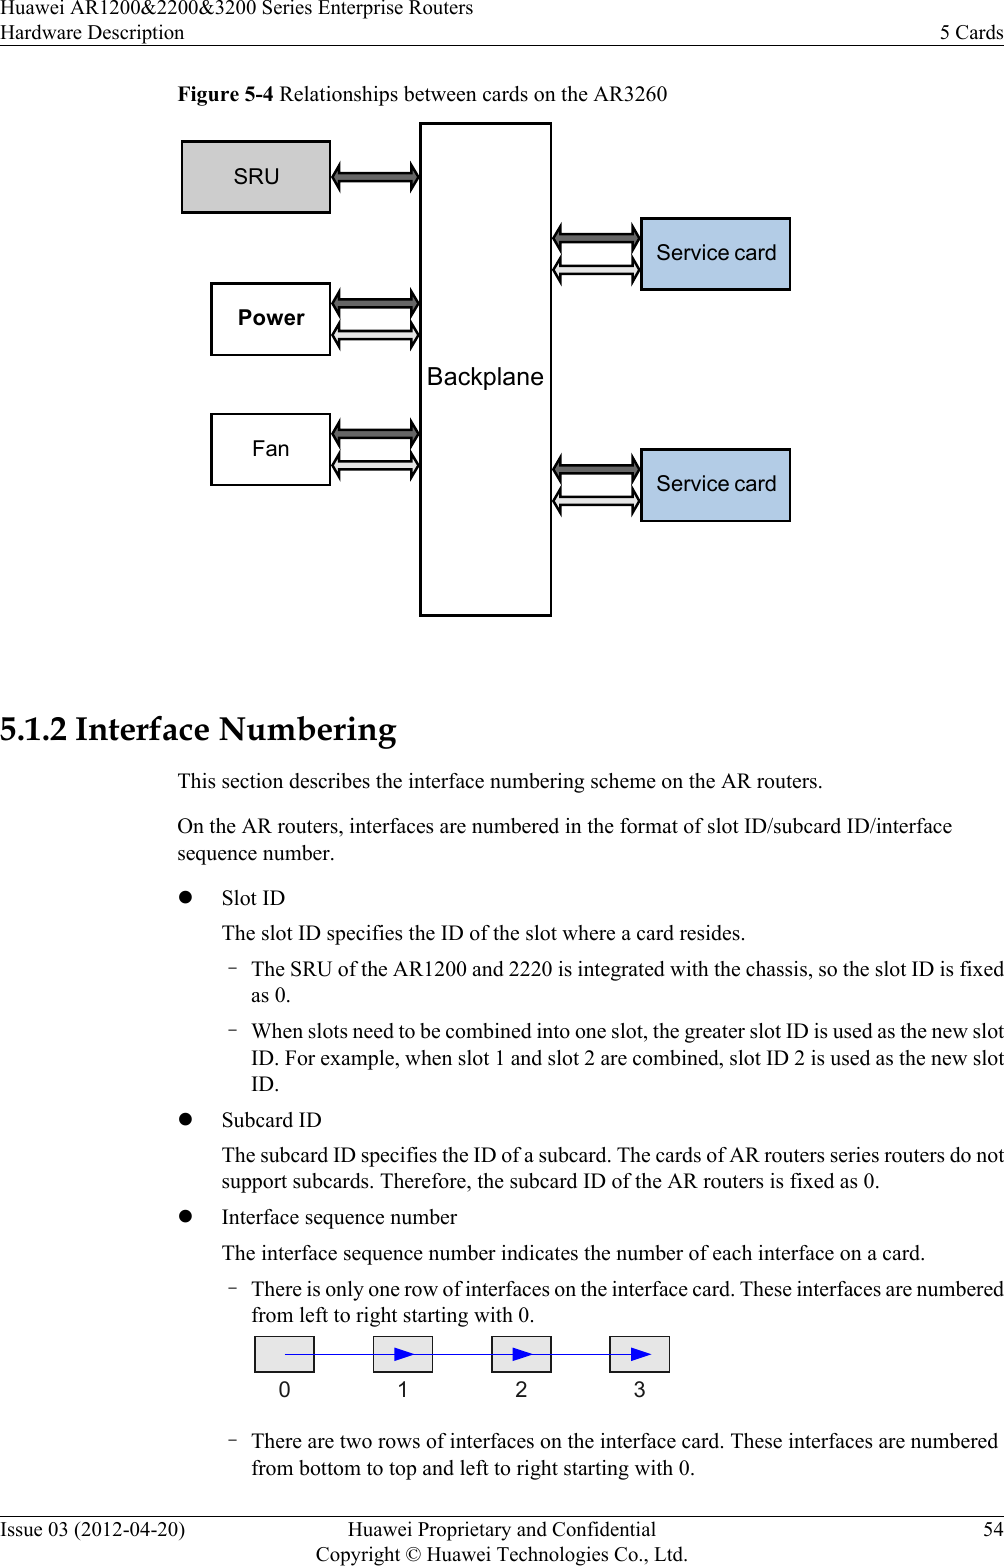 Figure 5-4 Relationships between cards on the AR3260PowerFanBackplaneSRUService cardService card 5.1.2 Interface NumberingThis section describes the interface numbering scheme on the AR routers.On the AR routers, interfaces are numbered in the format of slot ID/subcard ID/interfacesequence number.lSlot IDThe slot ID specifies the ID of the slot where a card resides.–The SRU of the AR1200 and 2220 is integrated with the chassis, so the slot ID is fixedas 0.–When slots need to be combined into one slot, the greater slot ID is used as the new slotID. For example, when slot 1 and slot 2 are combined, slot ID 2 is used as the new slotID.lSubcard IDThe subcard ID specifies the ID of a subcard. The cards of AR routers series routers do notsupport subcards. Therefore, the subcard ID of the AR routers is fixed as 0.lInterface sequence numberThe interface sequence number indicates the number of each interface on a card.–There is only one row of interfaces on the interface card. These interfaces are numberedfrom left to right starting with 0.0 1 2 3–There are two rows of interfaces on the interface card. These interfaces are numberedfrom bottom to top and left to right starting with 0.Huawei AR1200&amp;2200&amp;3200 Series Enterprise RoutersHardware Description 5 CardsIssue 03 (2012-04-20) Huawei Proprietary and ConfidentialCopyright © Huawei Technologies Co., Ltd.54